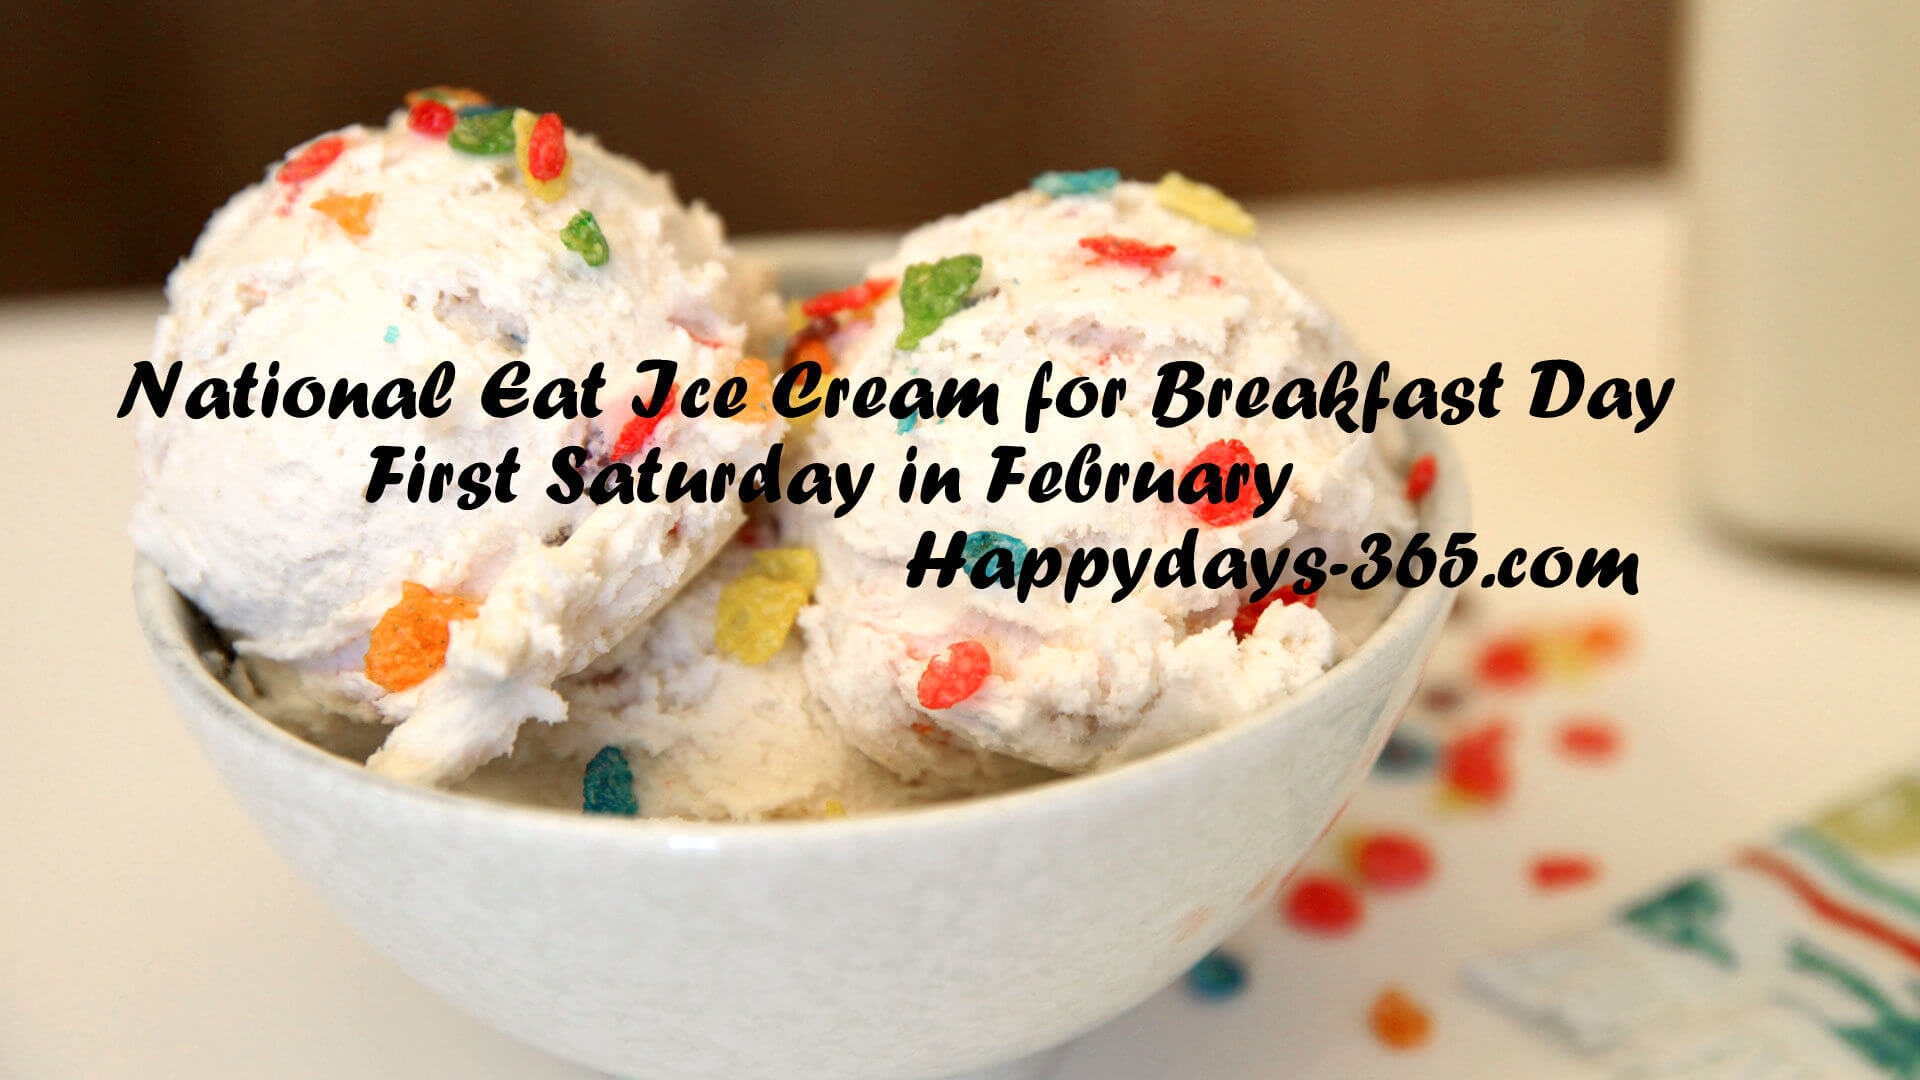 National Eat Ice Cream For Breakfast Day February 2 2019 Happy